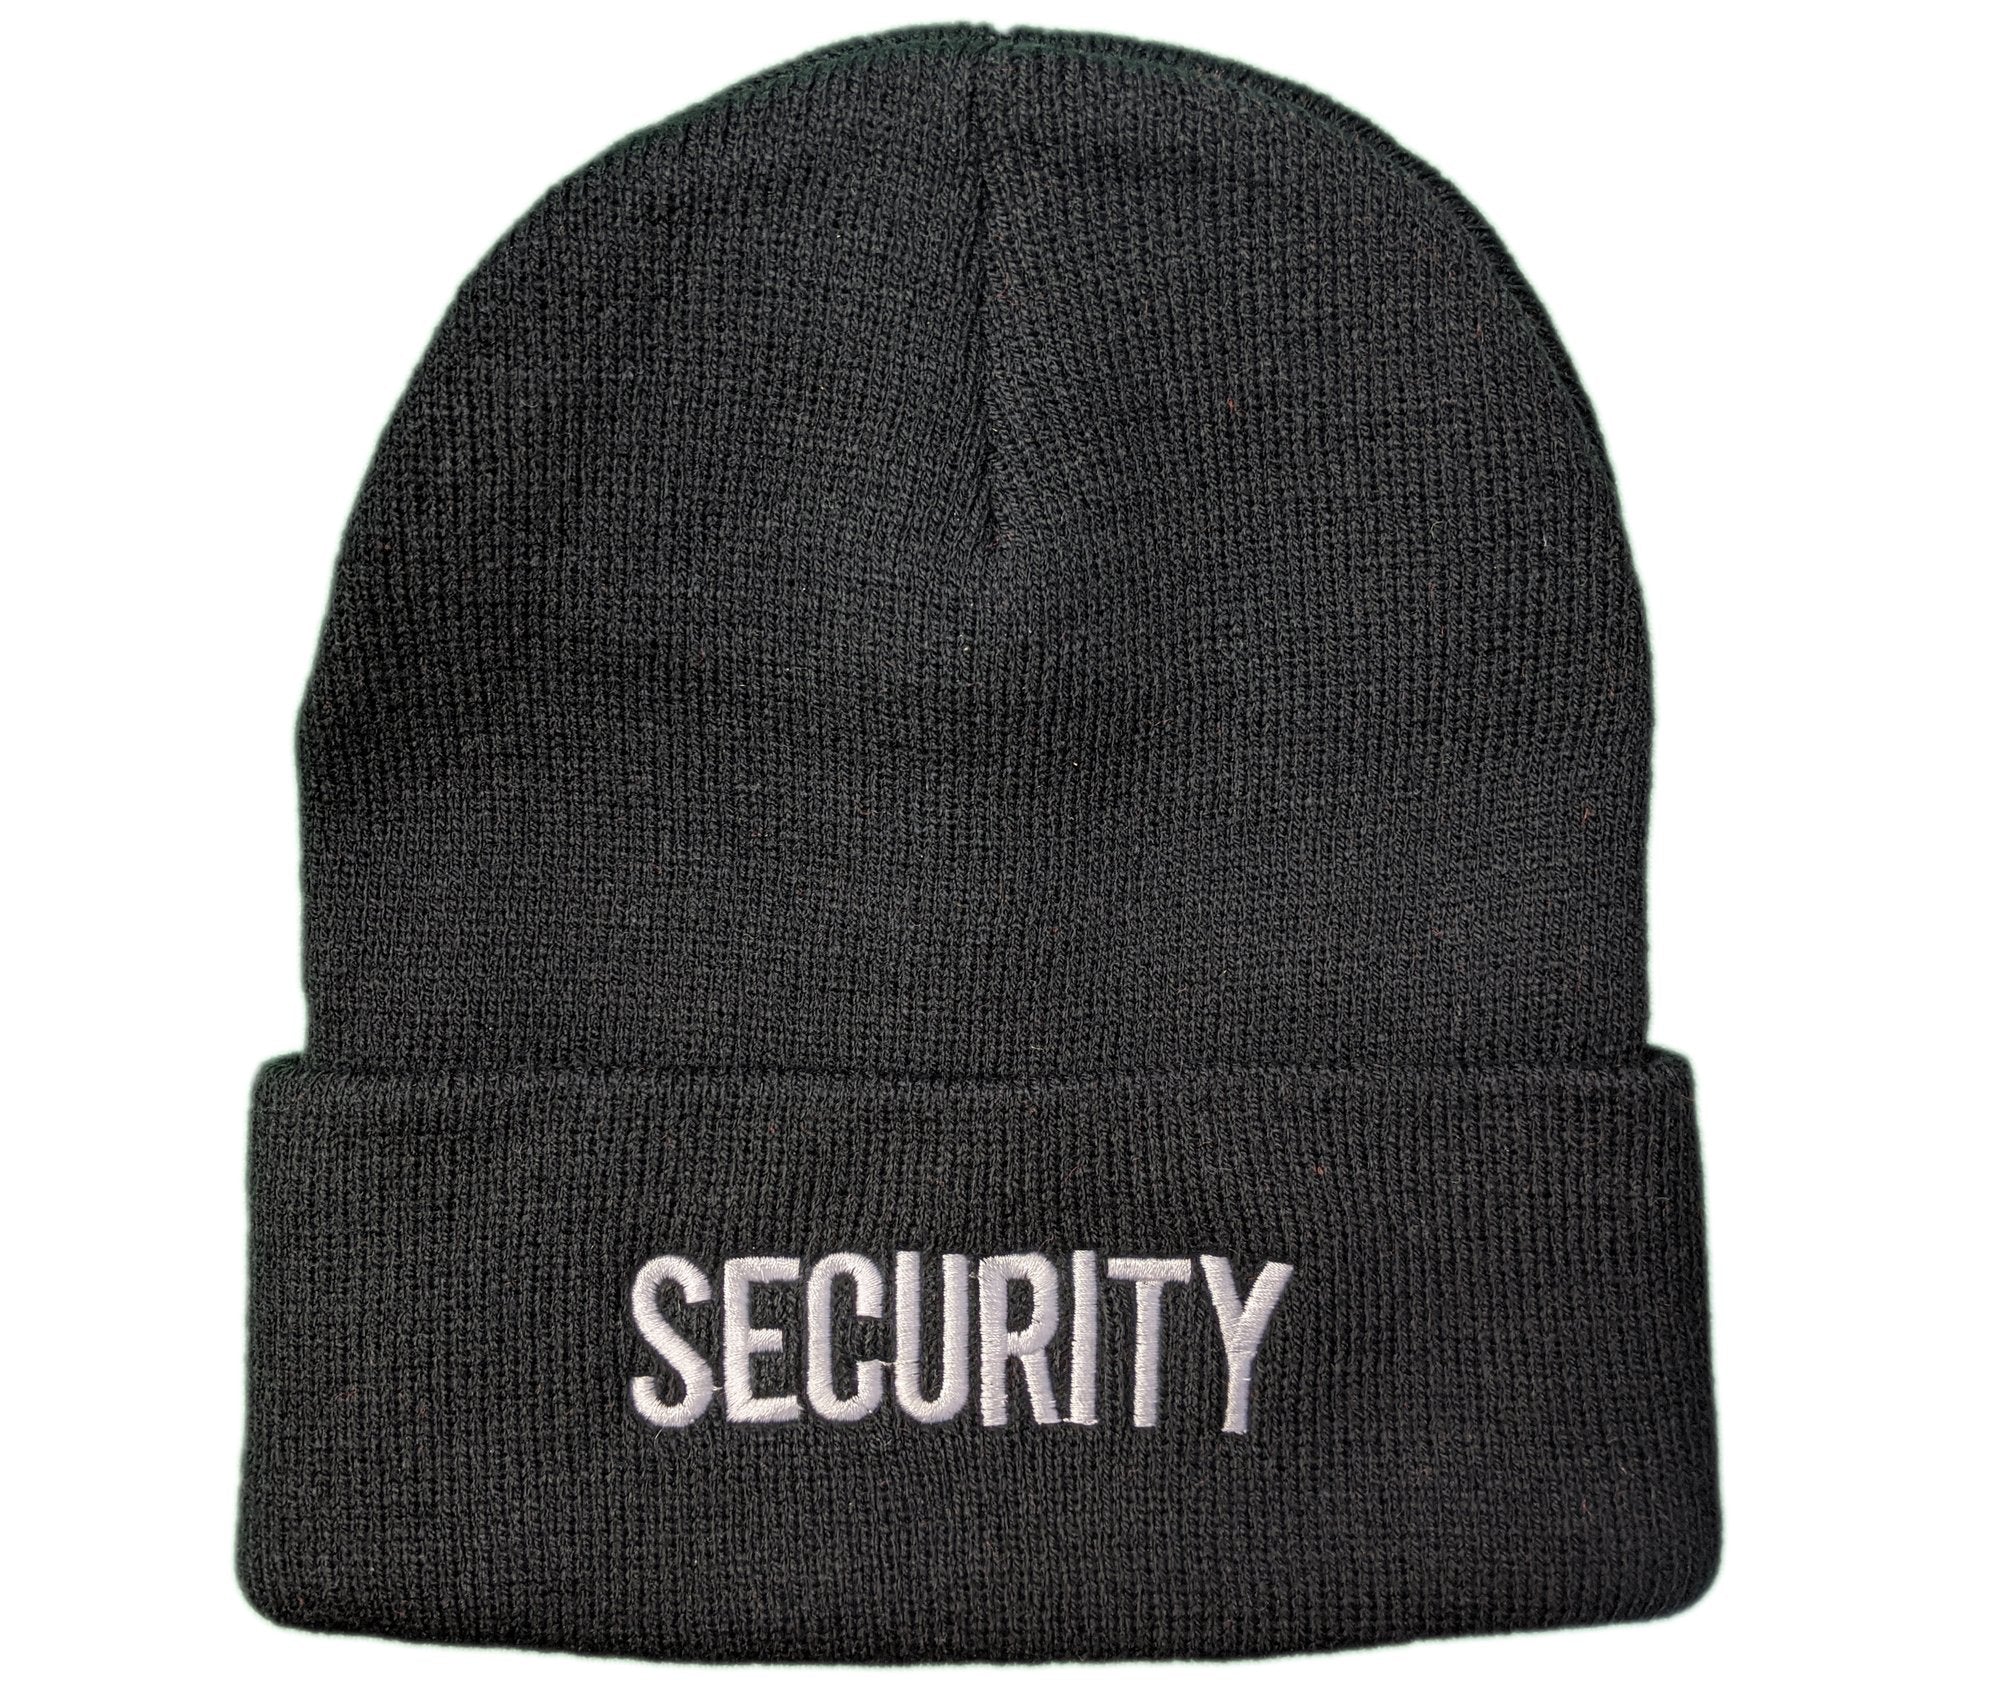 NYC Factory Men's Security Knit Cap Beanie USA Embroidered Winter Hat